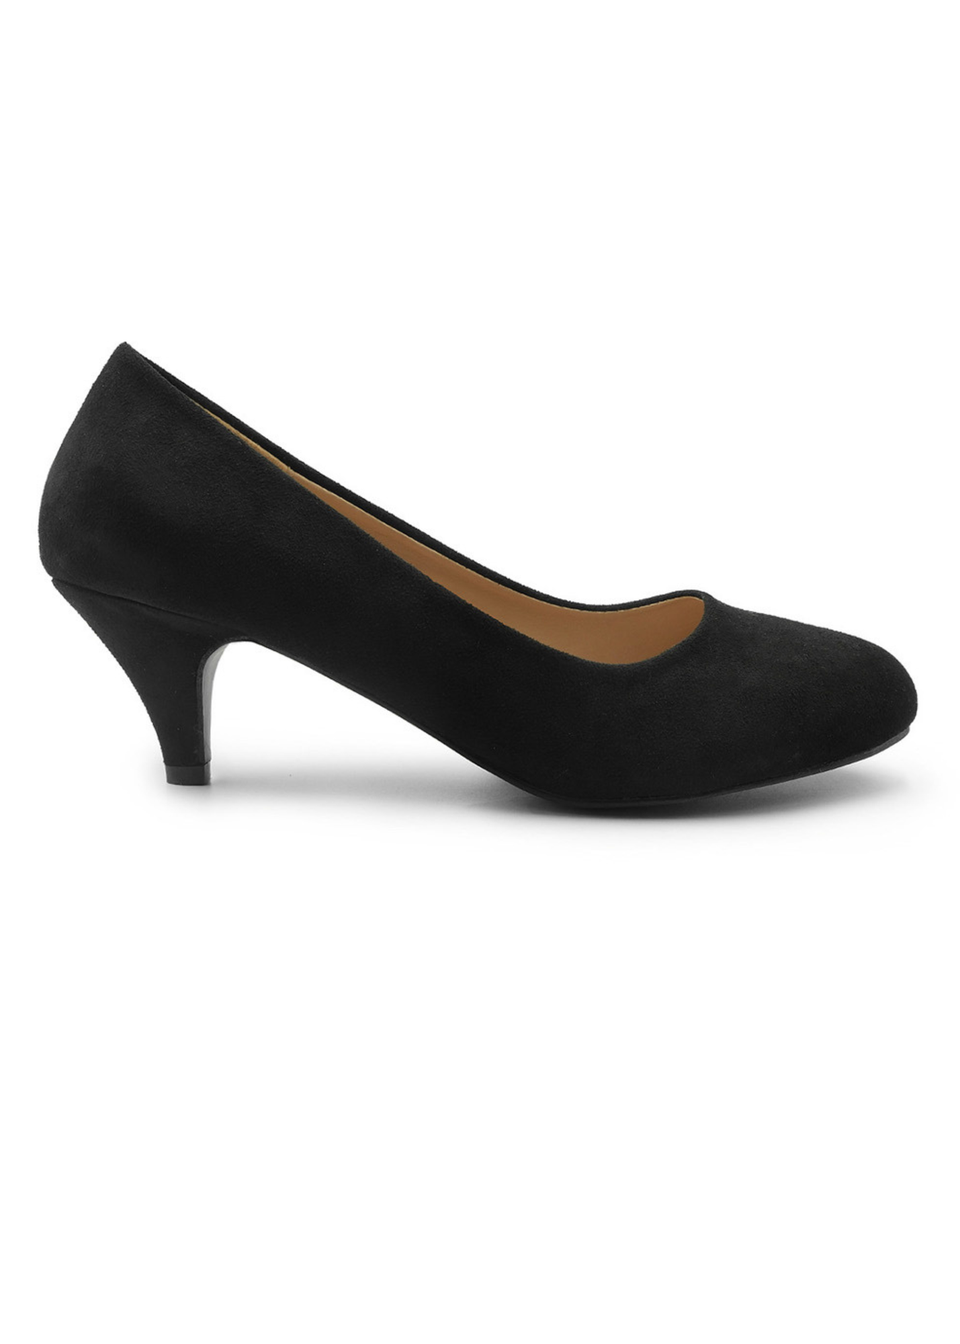 Where's That From Black Pu Shea Low Heel Court Pumps